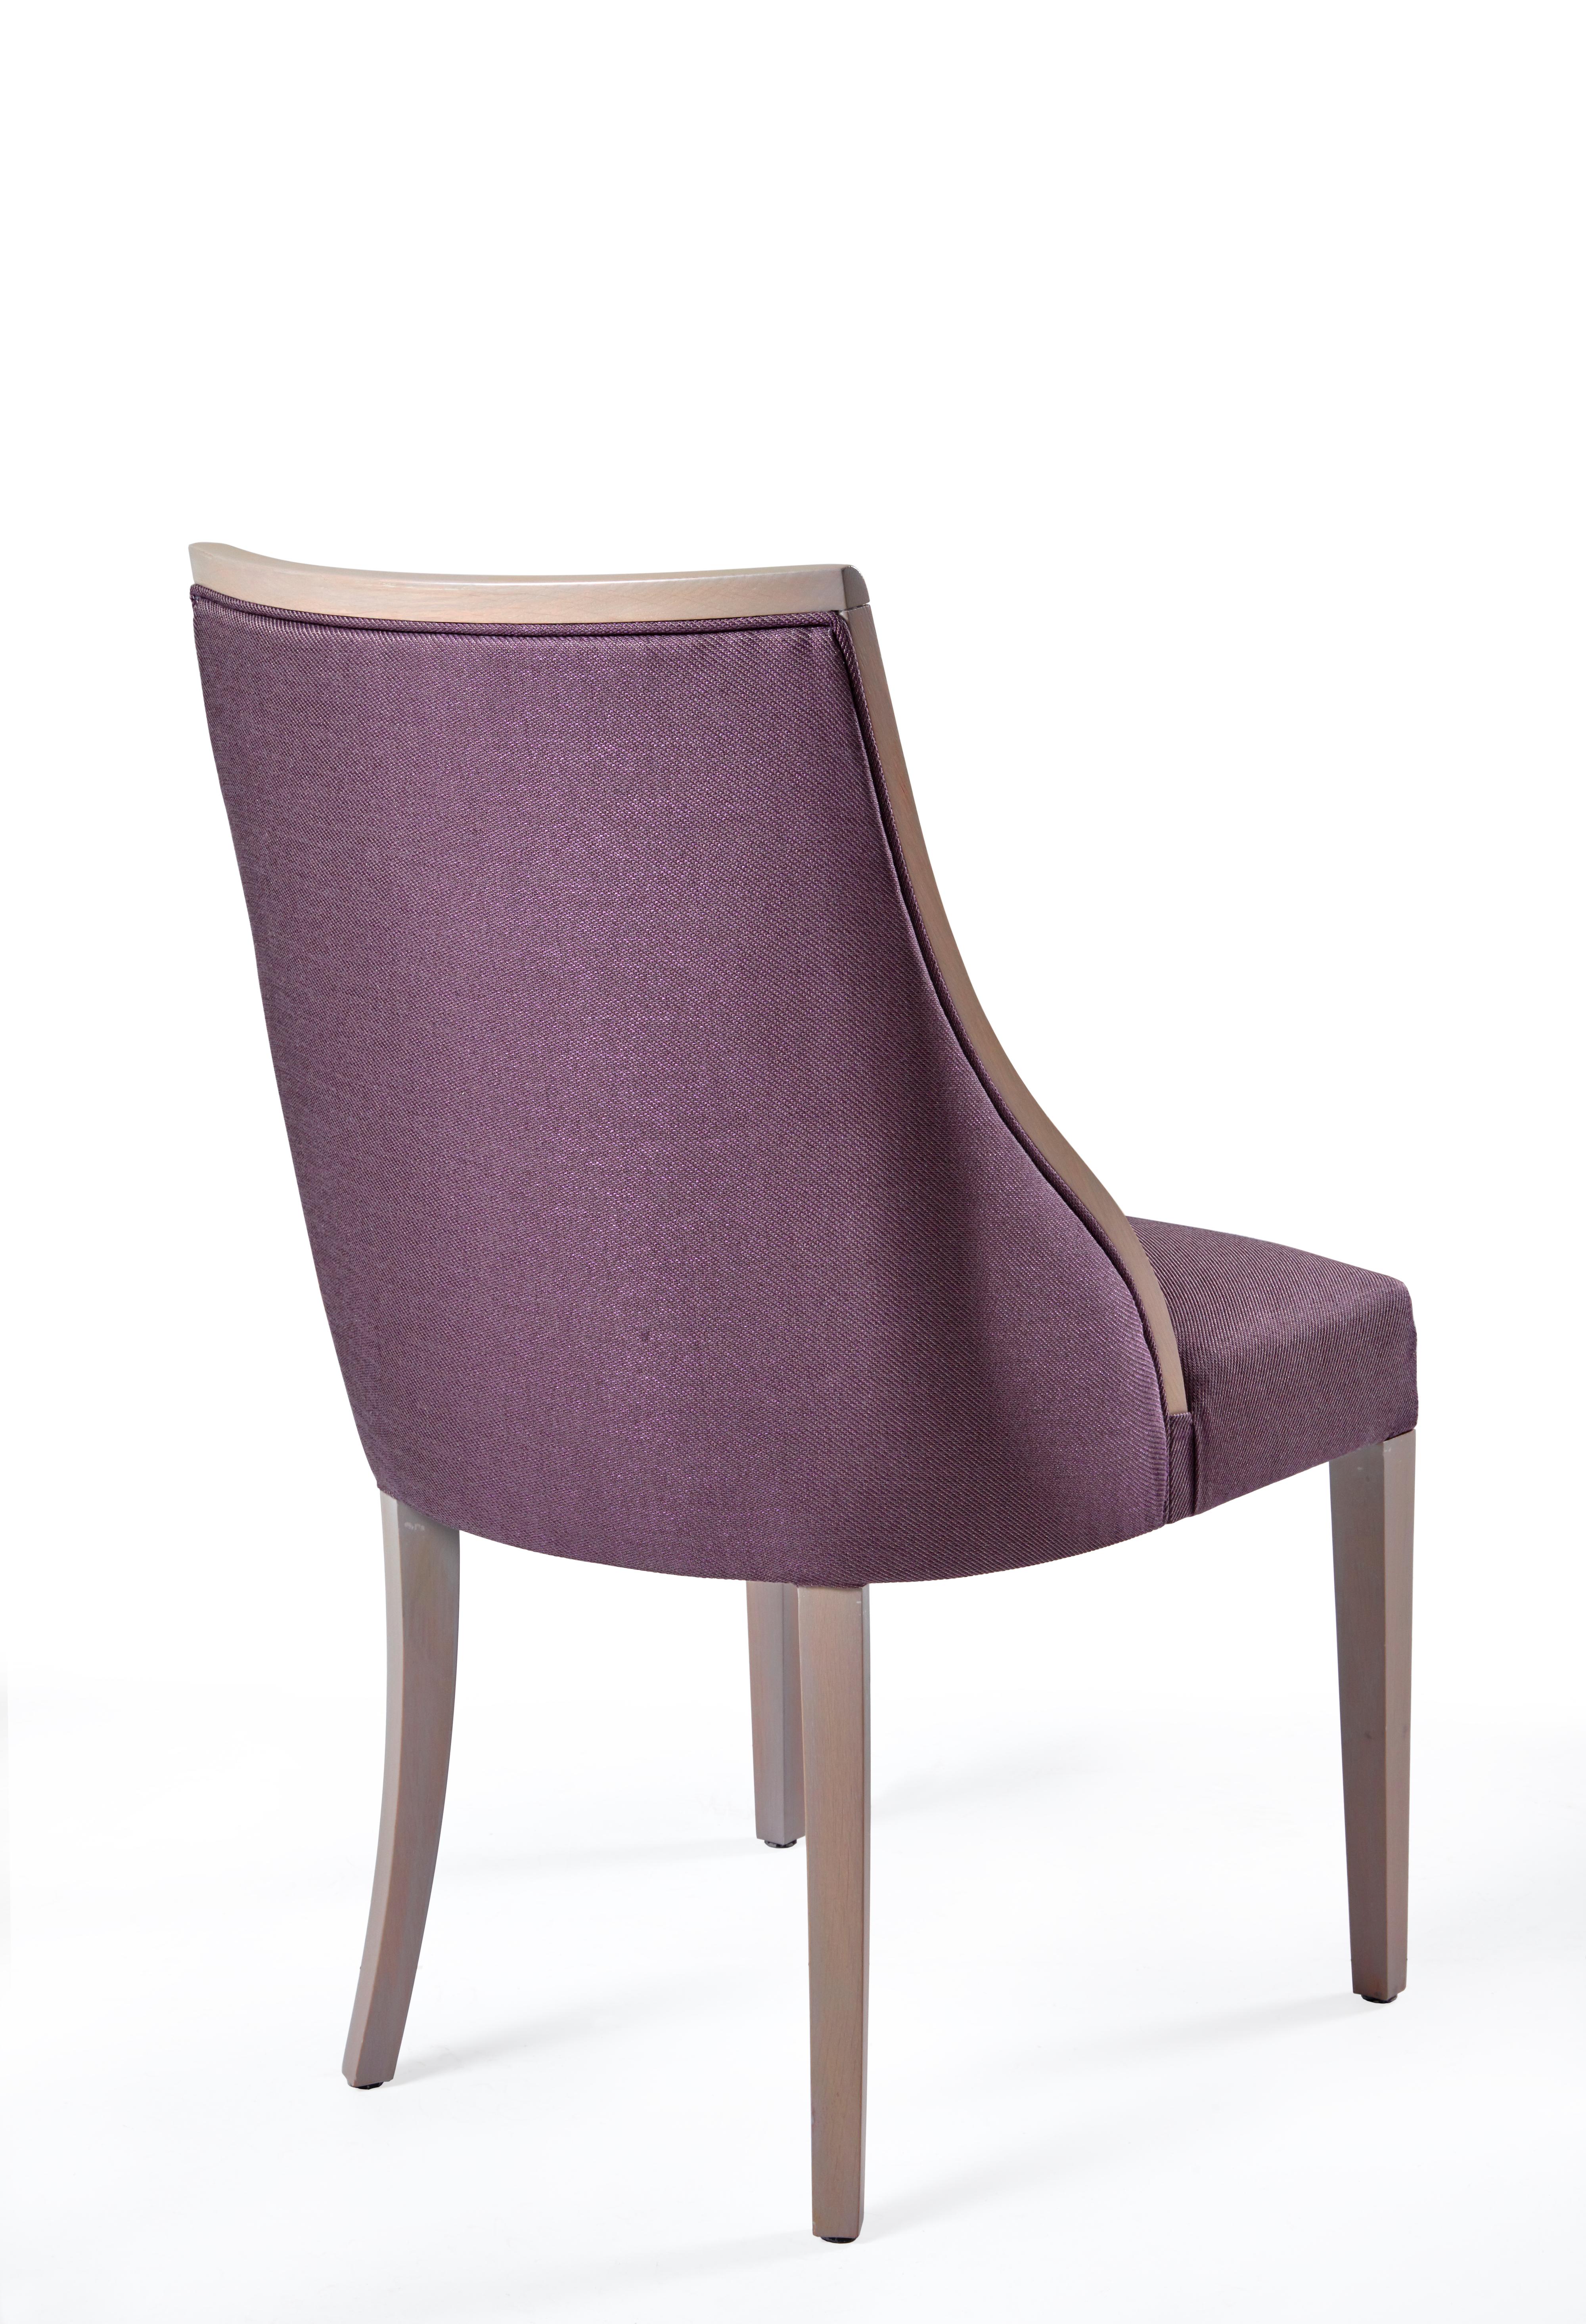 The chair has major curve appeal! A sultry side silhouette, flared back leg and sink-in seat make this the perfect chair for long dinner parties.